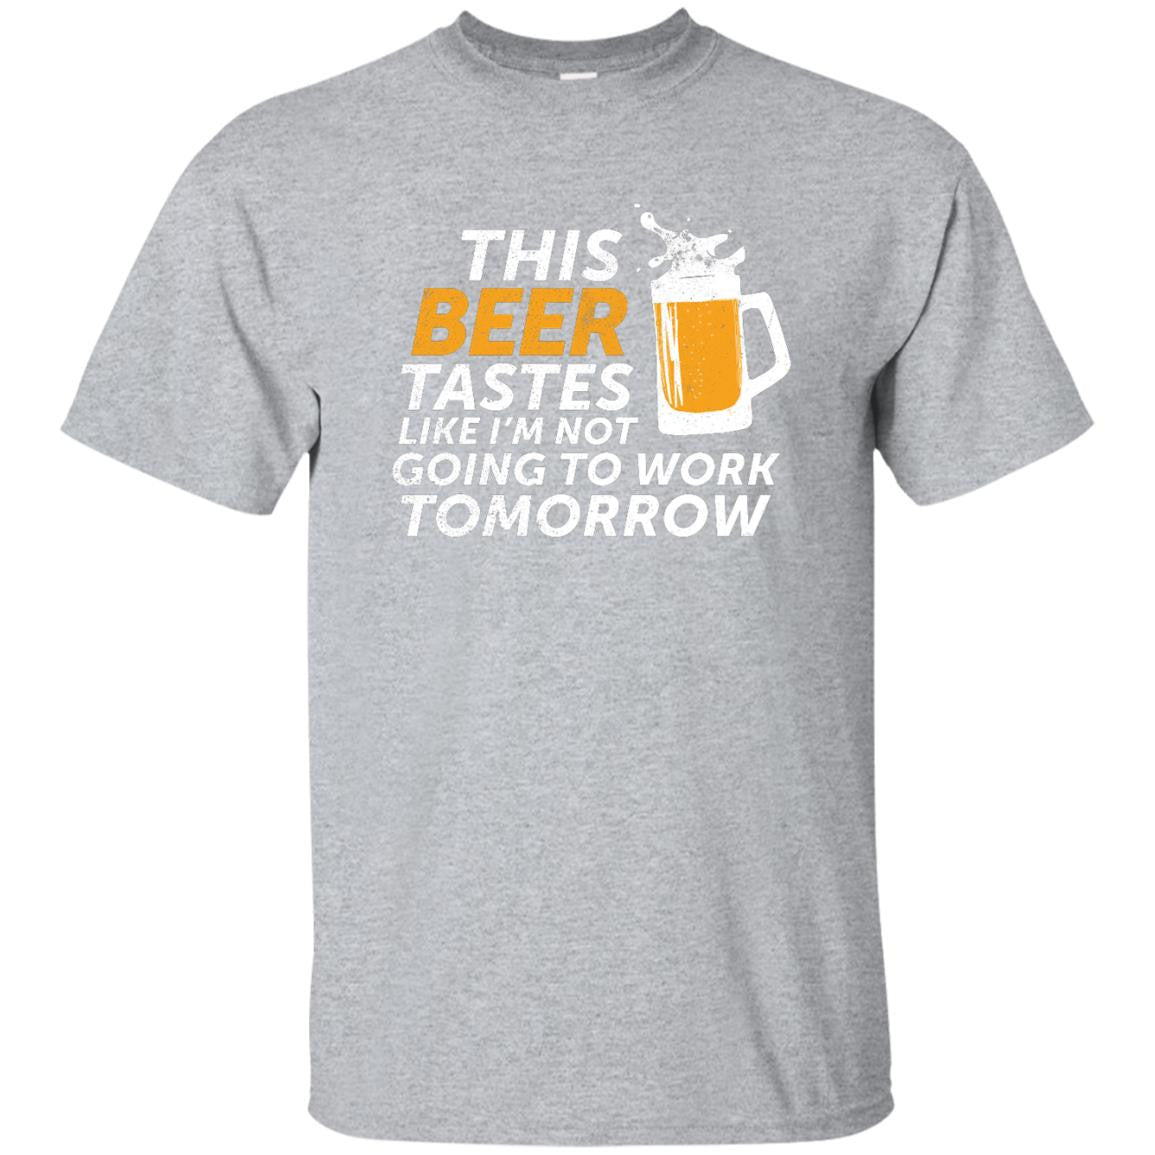 This Beer Tastes Like I'm Not Going To Work Tomorrow T-Shirt Apparel - The Beer Lodge